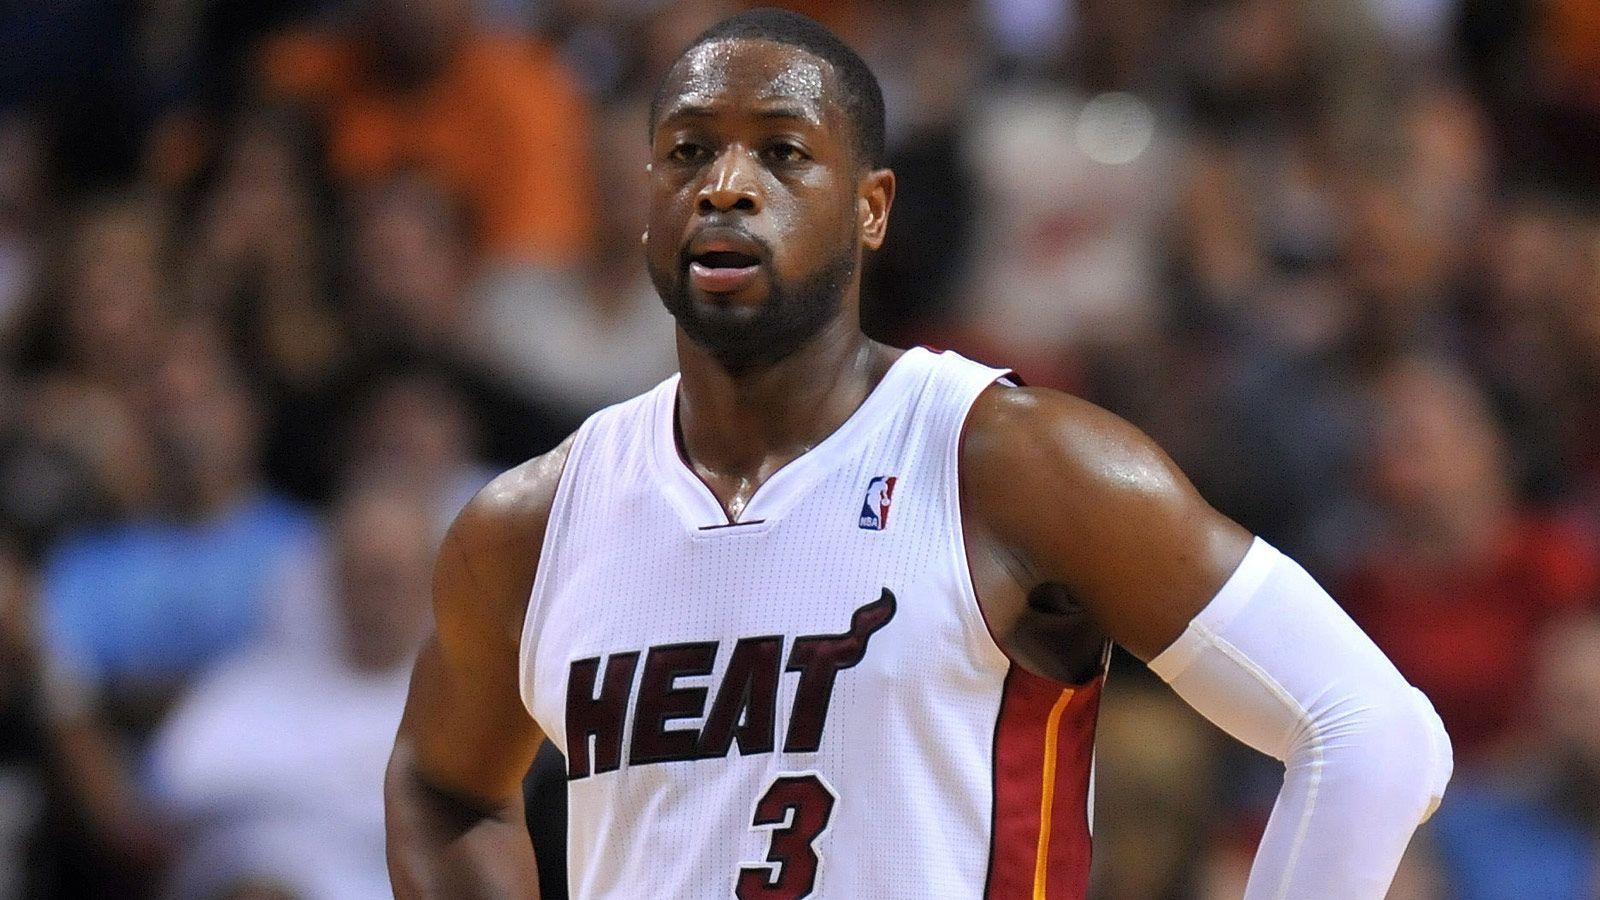 Dwyane Wade comments on LeBron James and the Cavs struggles